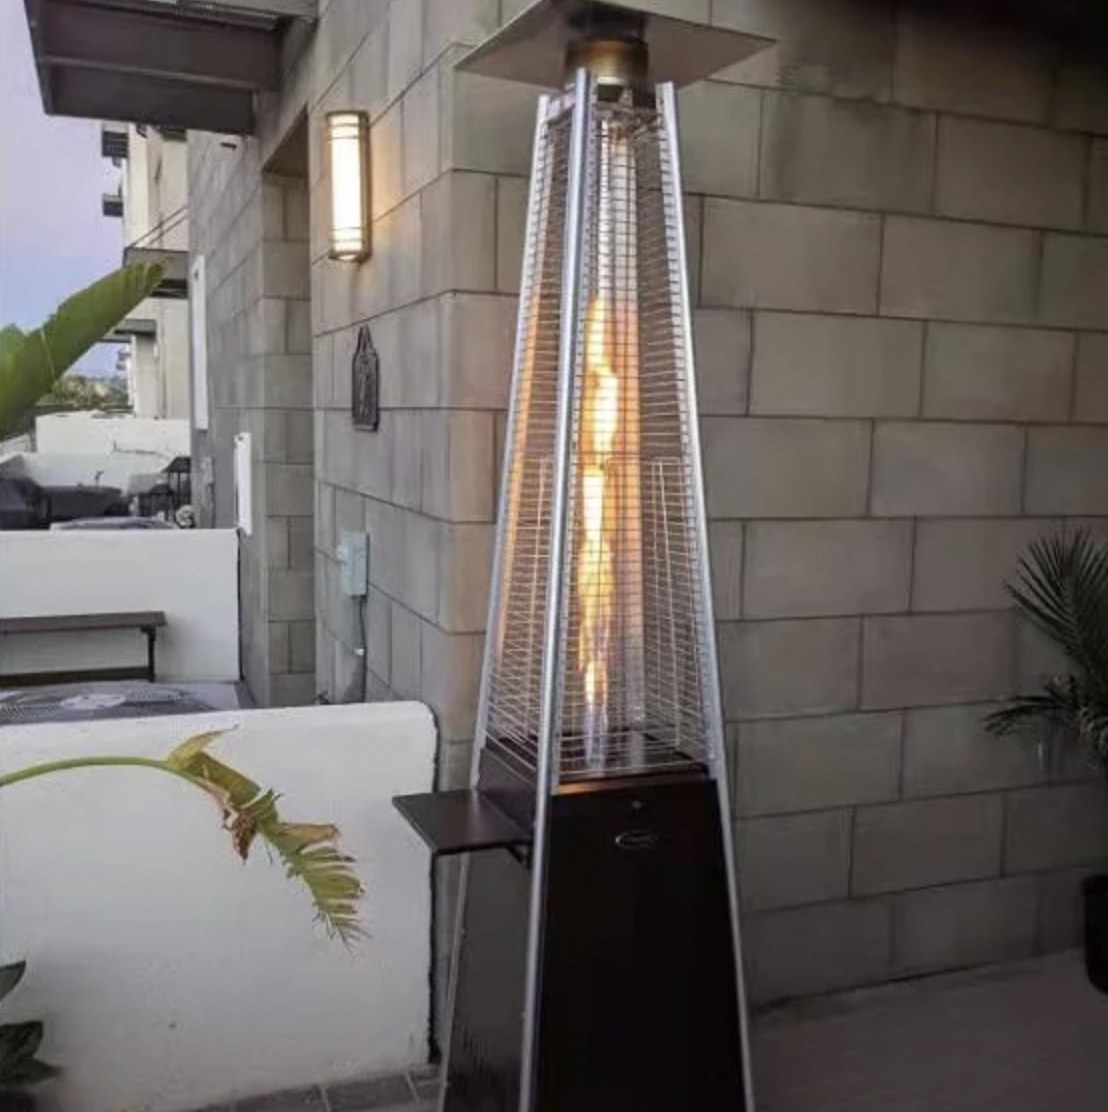 Outdoor patio heater with flame inside glass tube next to furniture